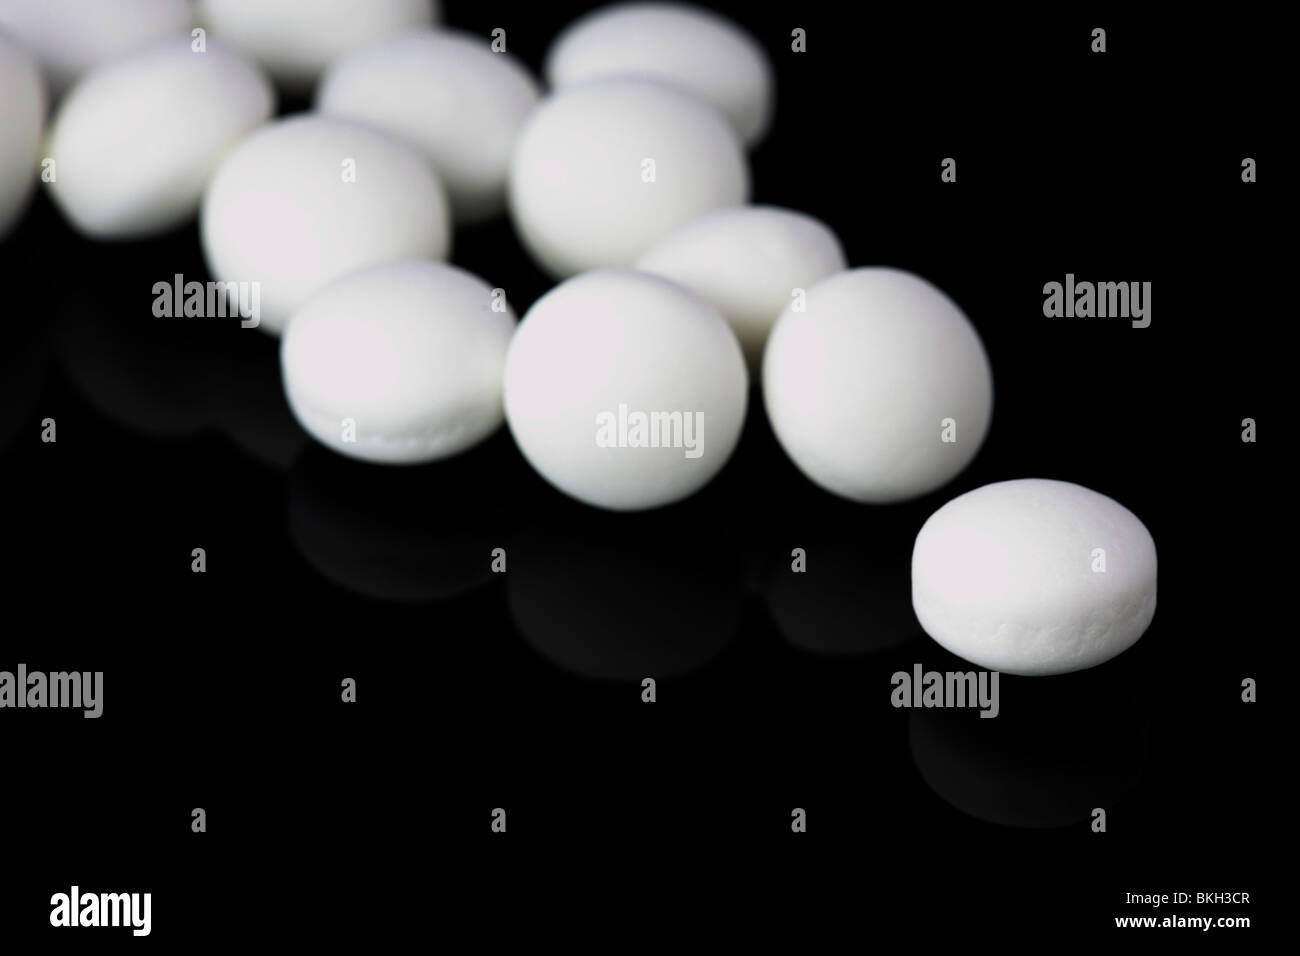 Imperial mints on a black reflective background Stock Photo